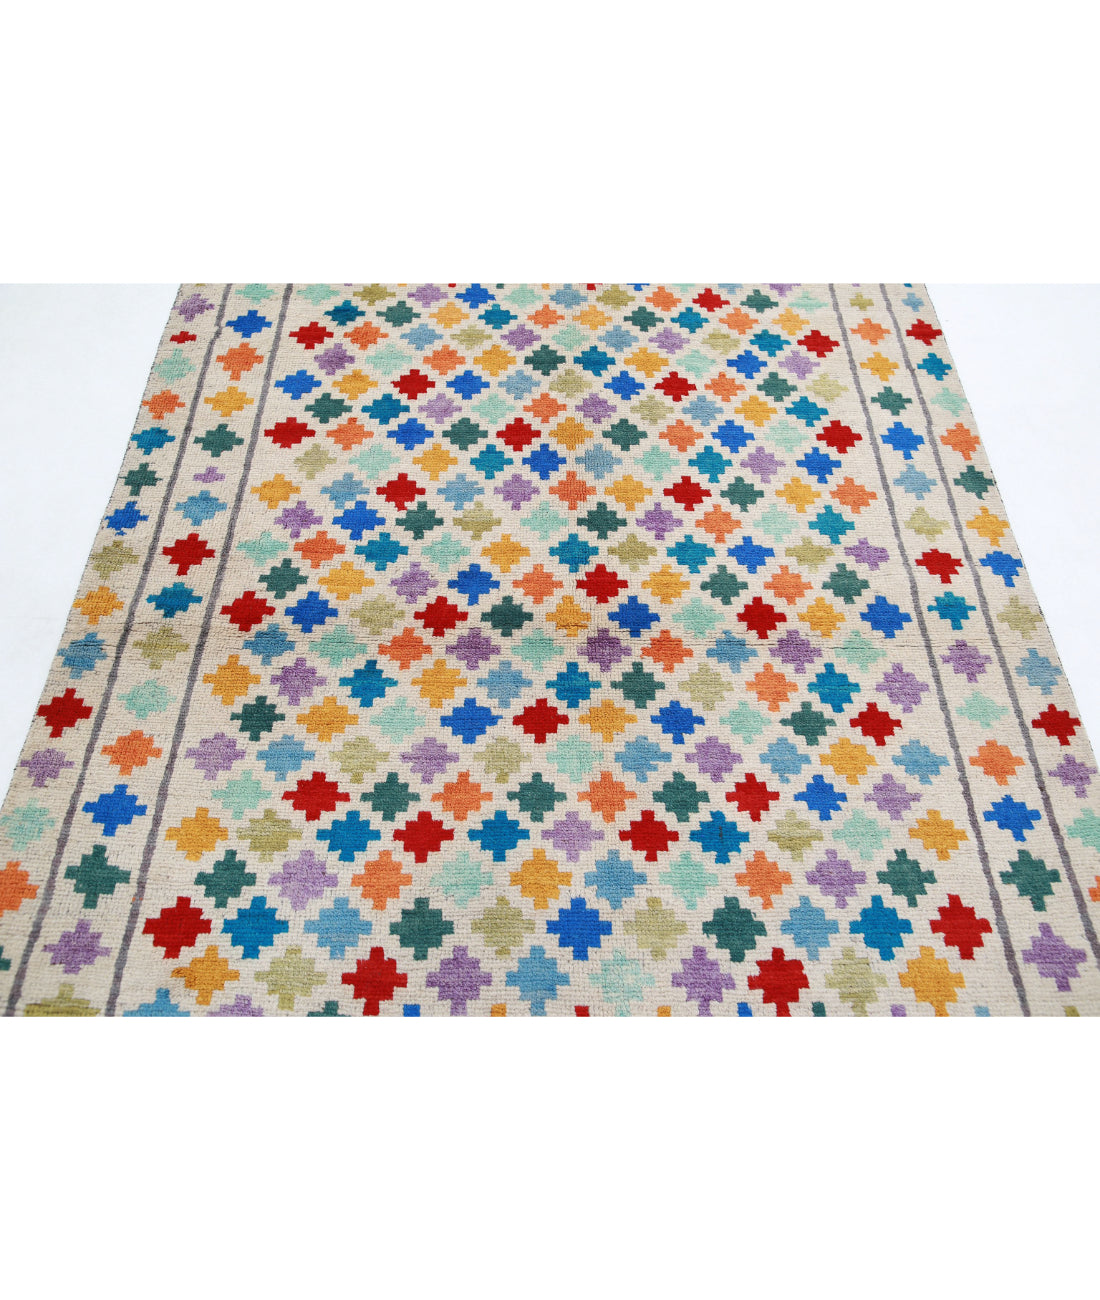 Revival 5'1'' X 6'8'' Hand-Knotted Wool Rug 5'1'' x 6'8'' (153 X 200) / Ivory / Multi